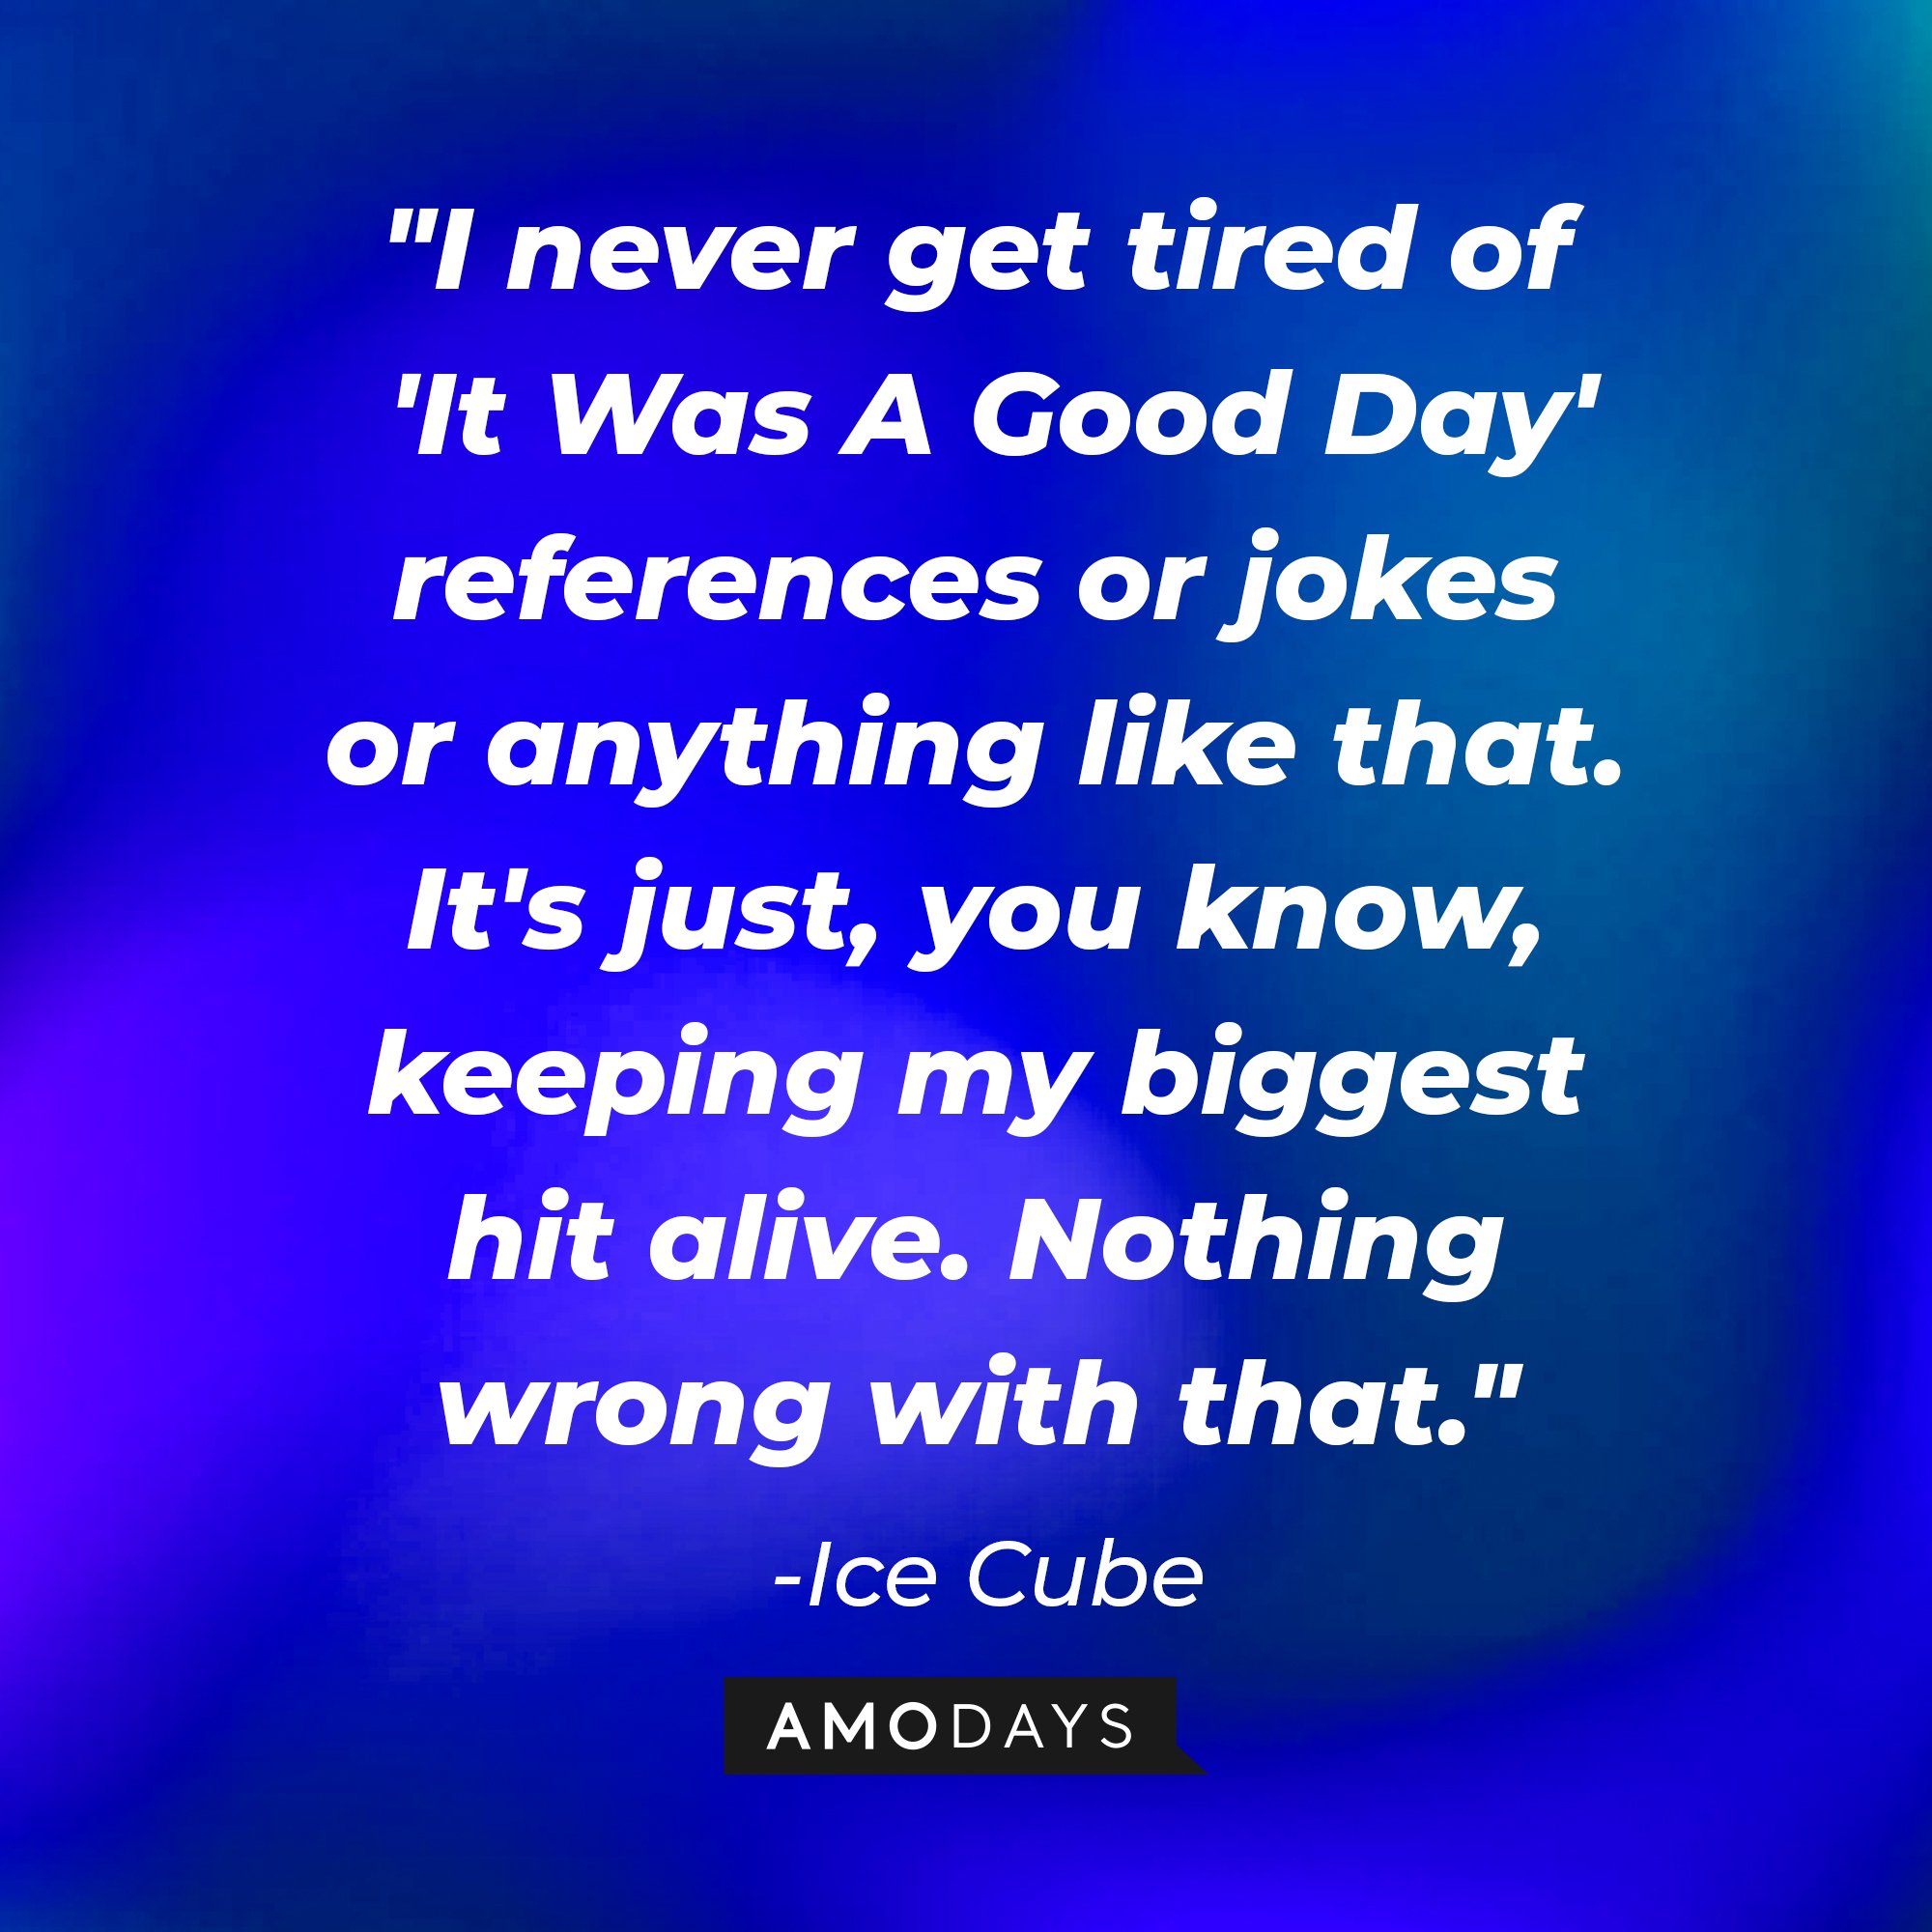 Ice Cube's quote: "I never get tired of 'It Was A Good Day' references or jokes or anything like that. It's just, you know, keeping my biggest hit alive. Nothing wrong with that." — Ice Cube | Image: AmoDays